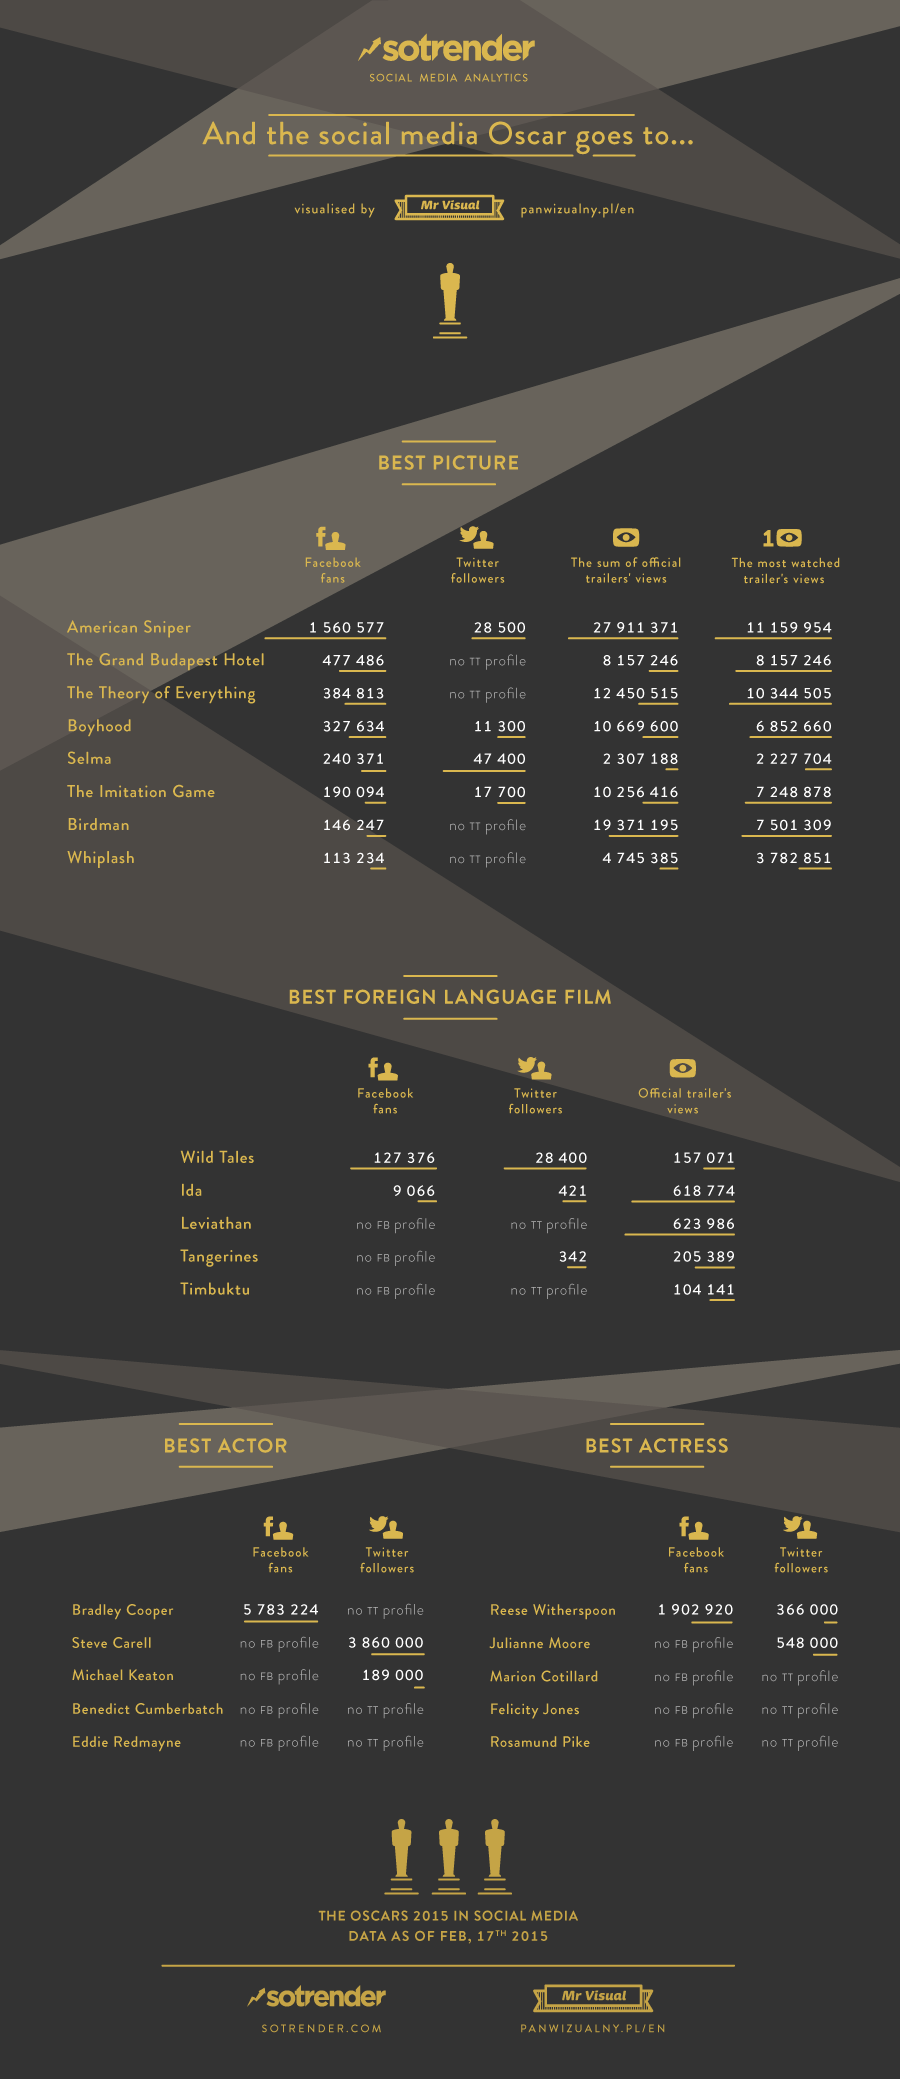 Oscar nominated films and actors in social media - Infographic